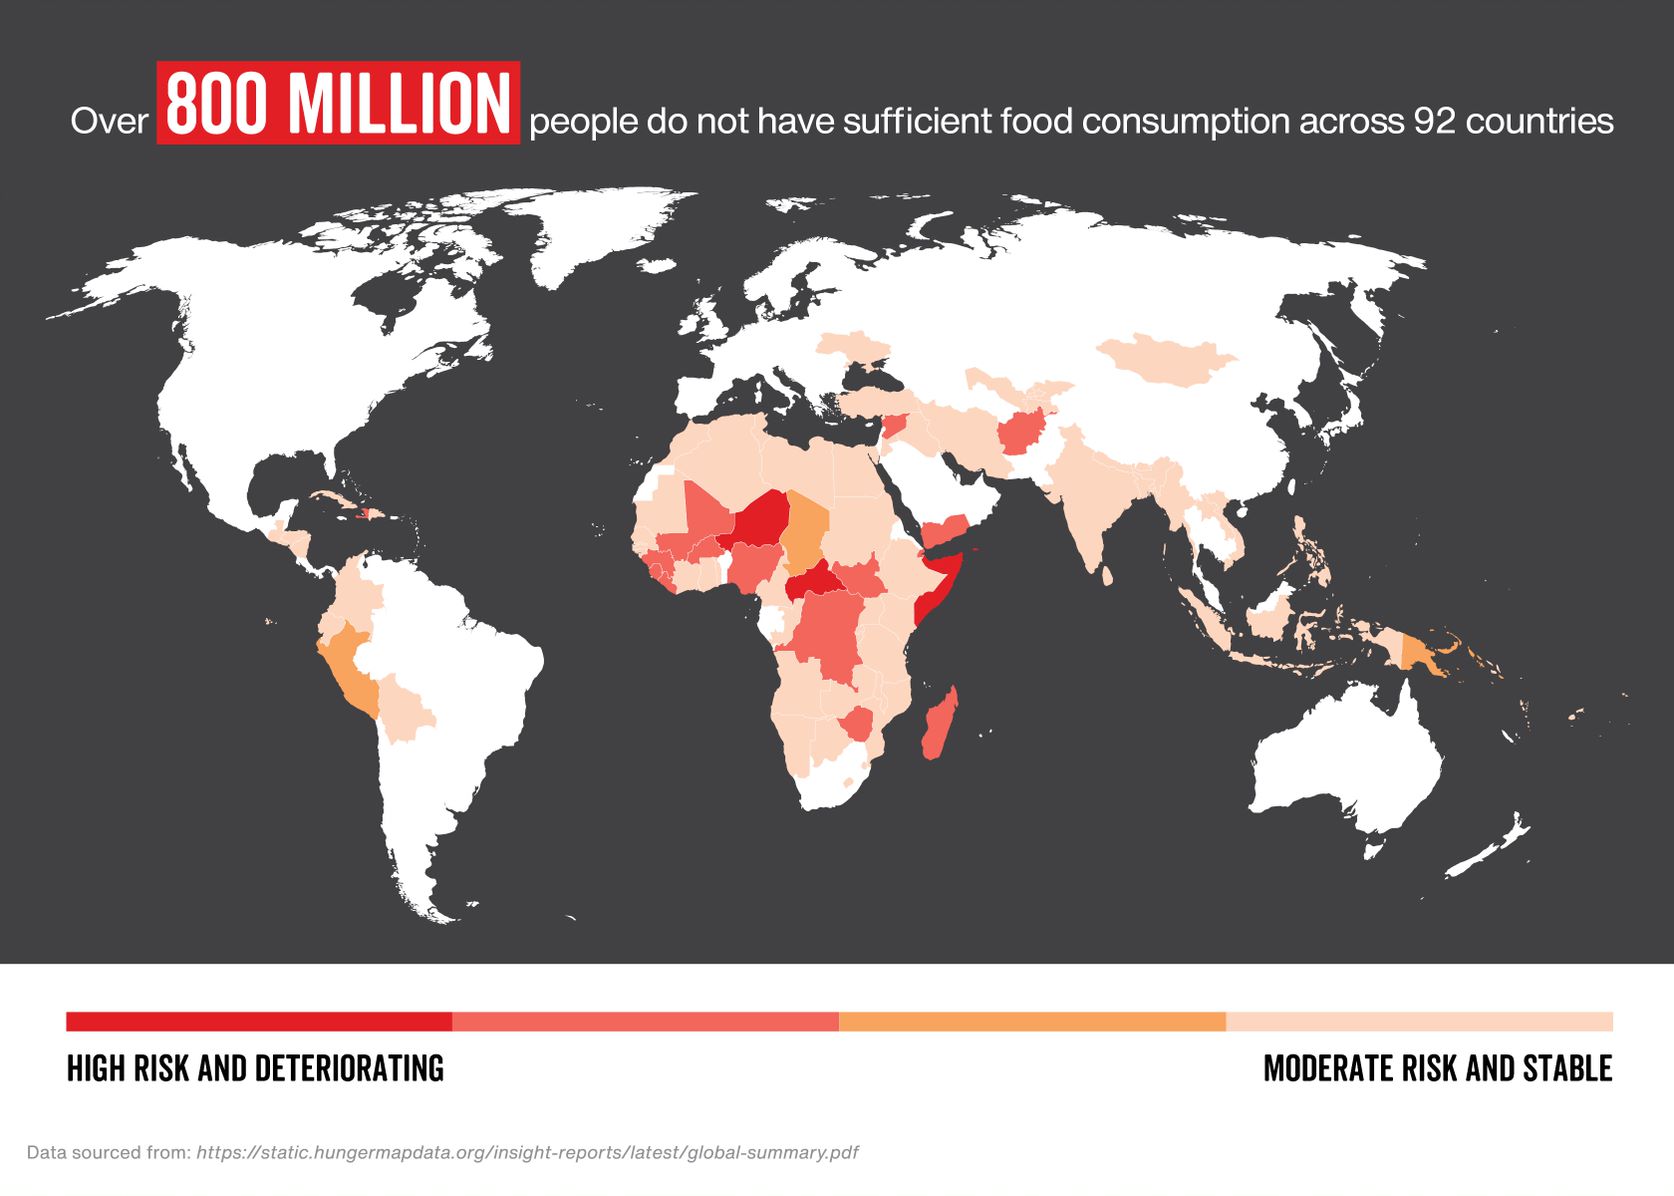 Map showing the impact of the Global Hunger Crisis